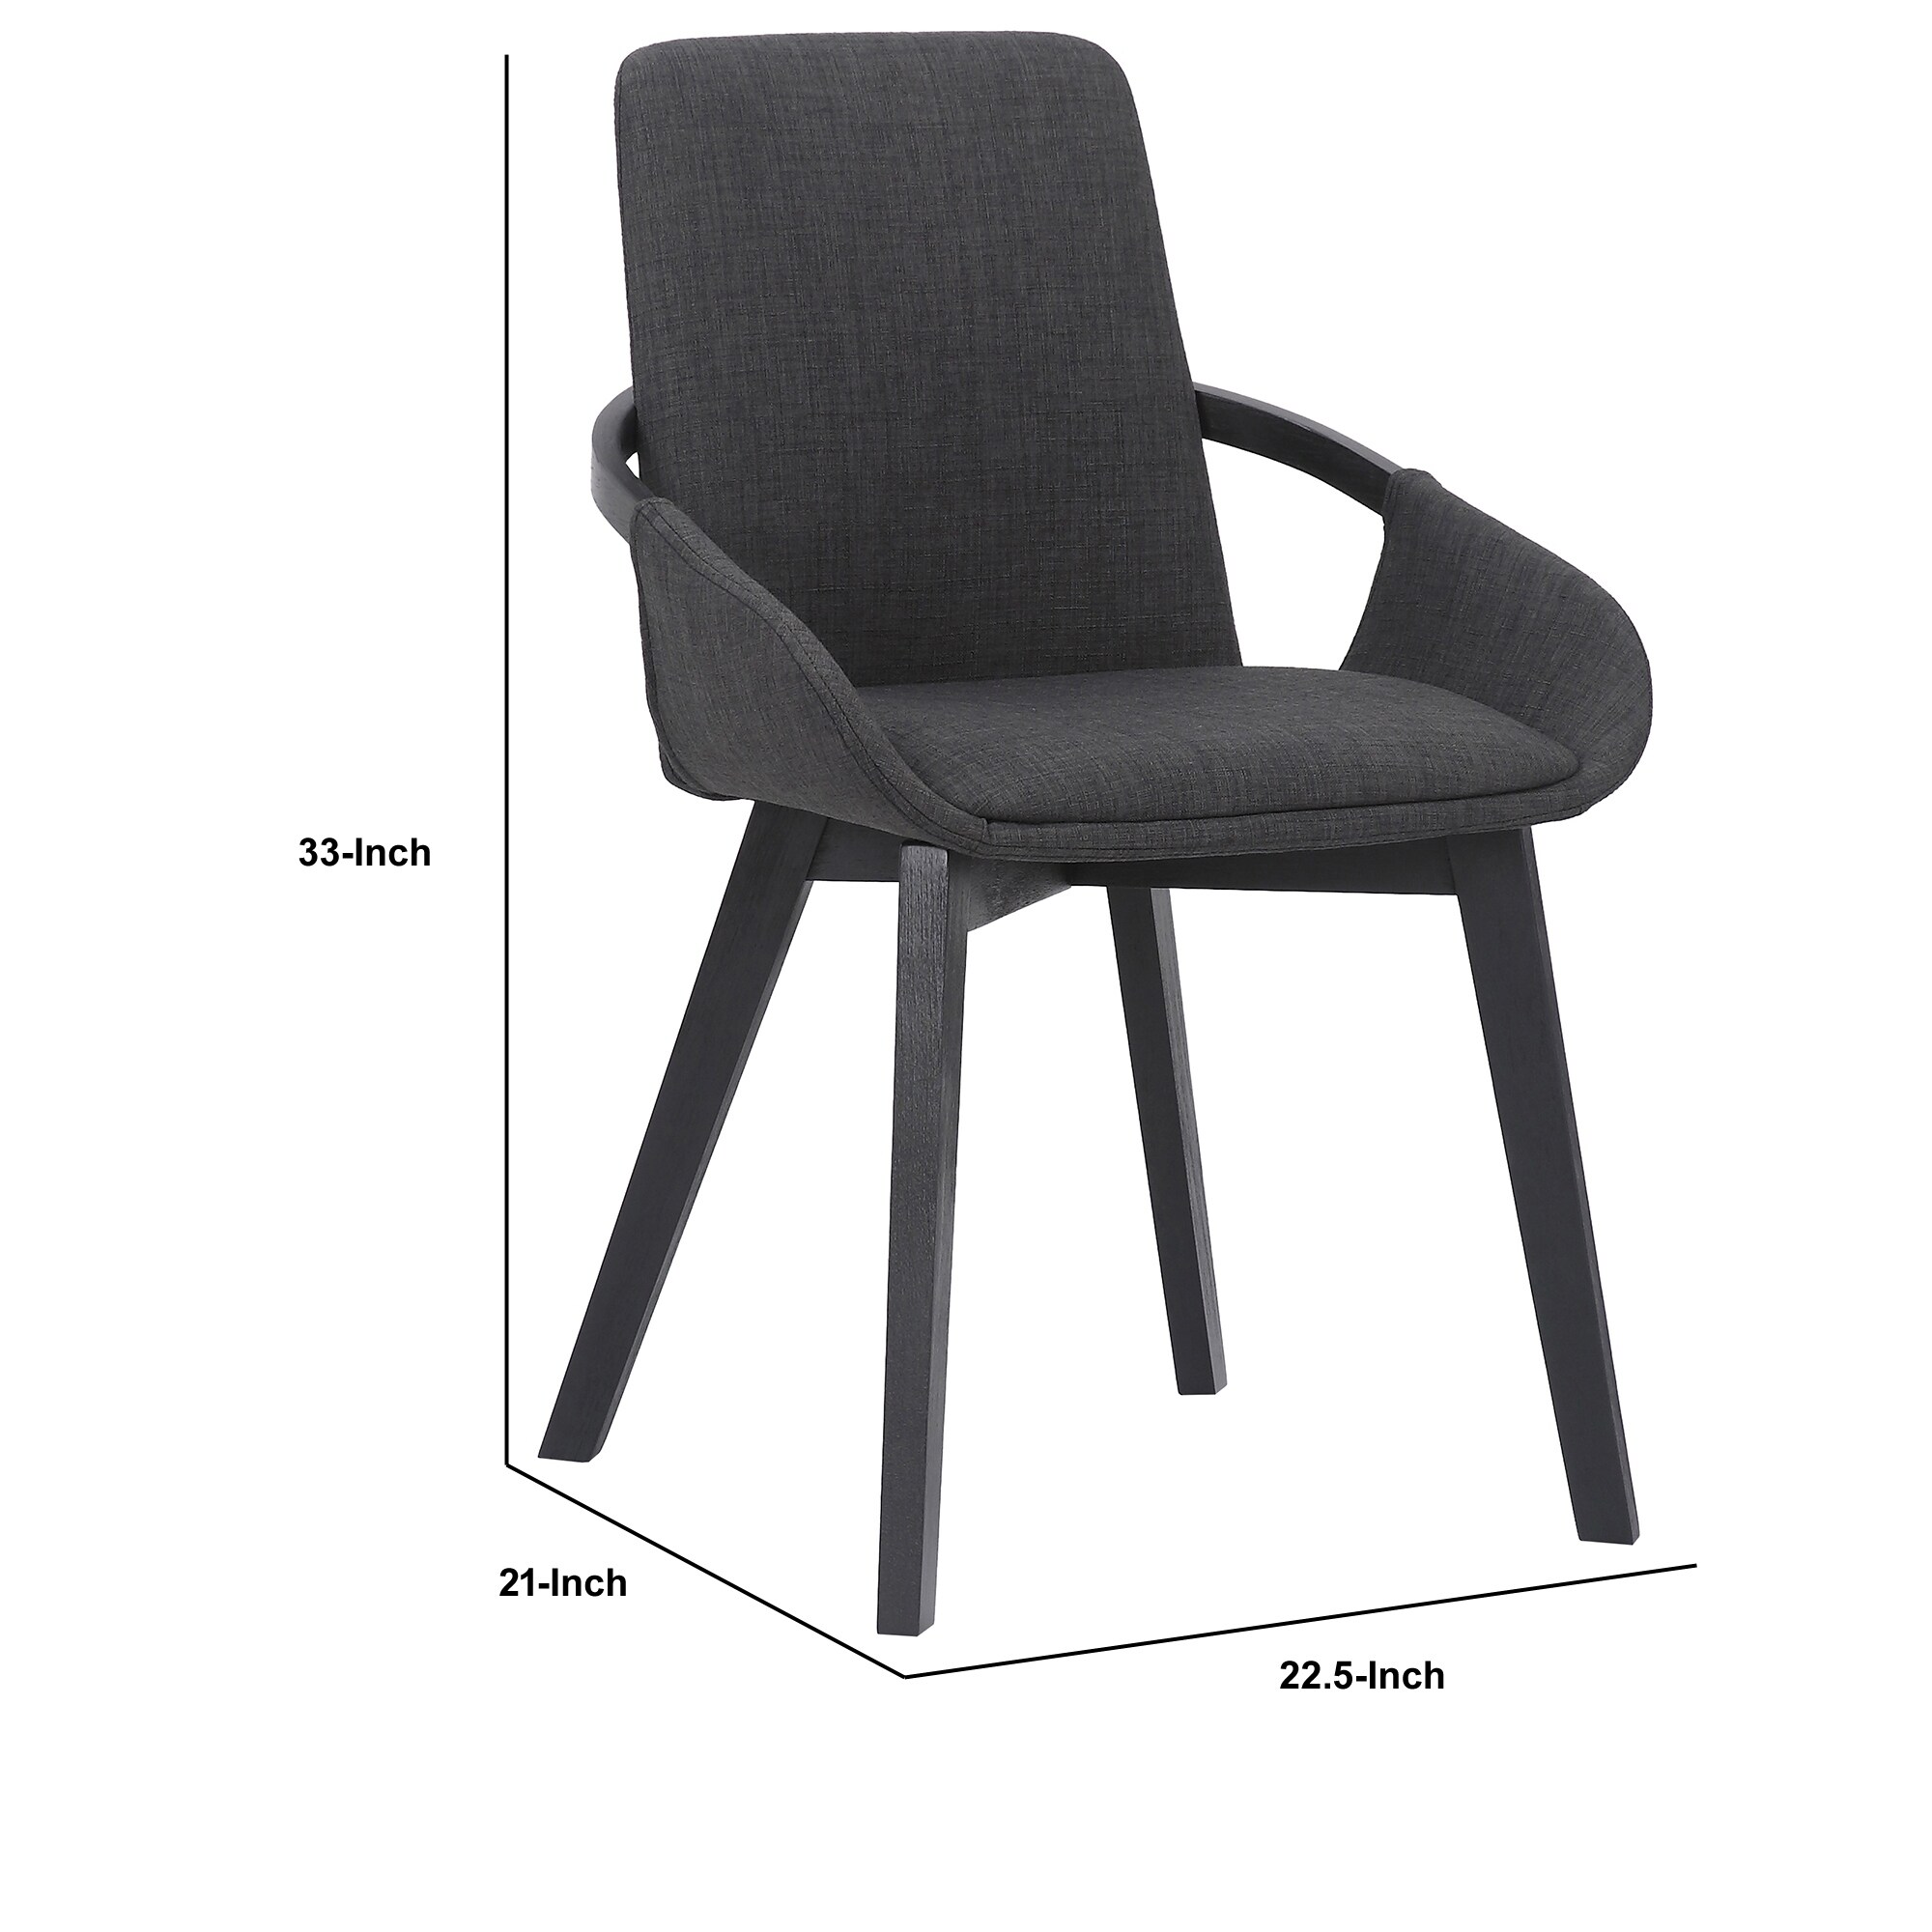 19 Inches Fabric Upholstered Dining Chair with Bucket Seat, Black